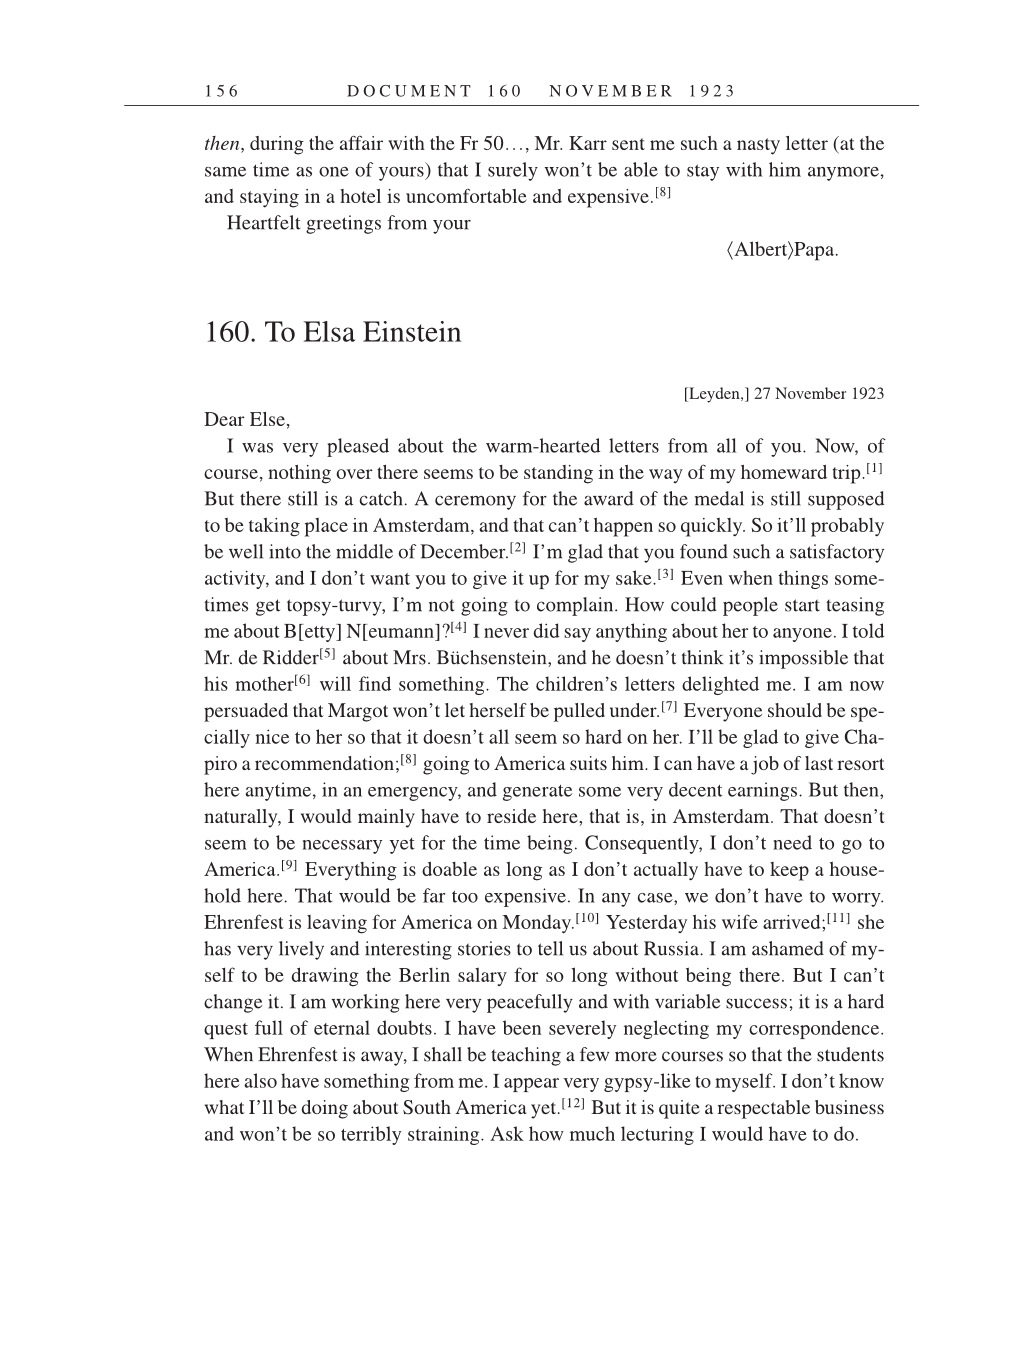 Volume 14: The Berlin Years: Writings & Correspondence, April 1923-May 1925 (English Translation Supplement) page 156